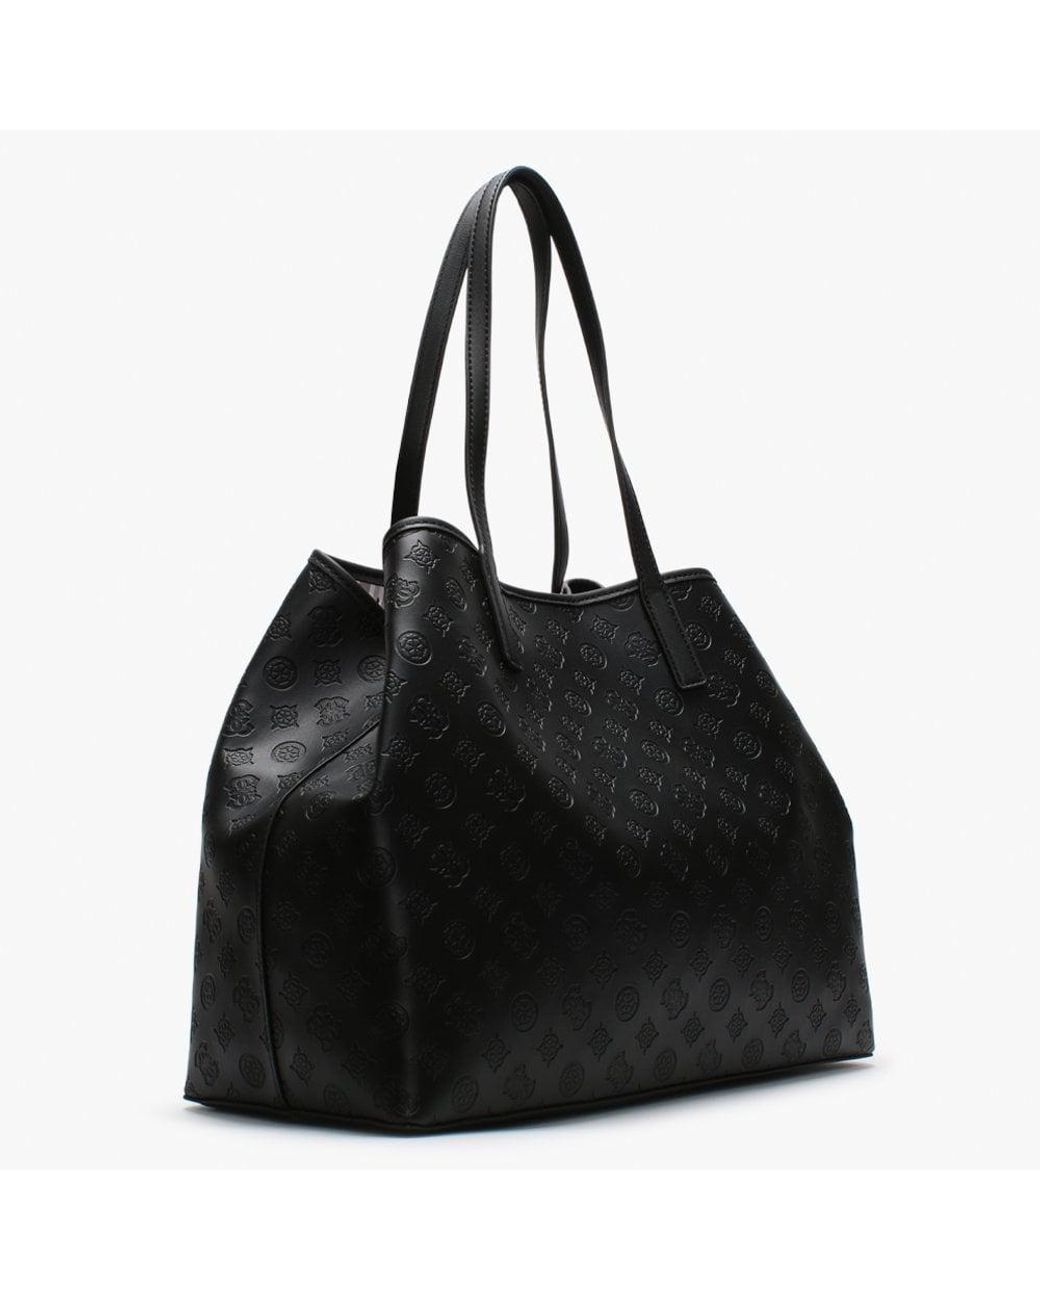 Guess Vikky Black Pebbled Slouchy Tote Bag